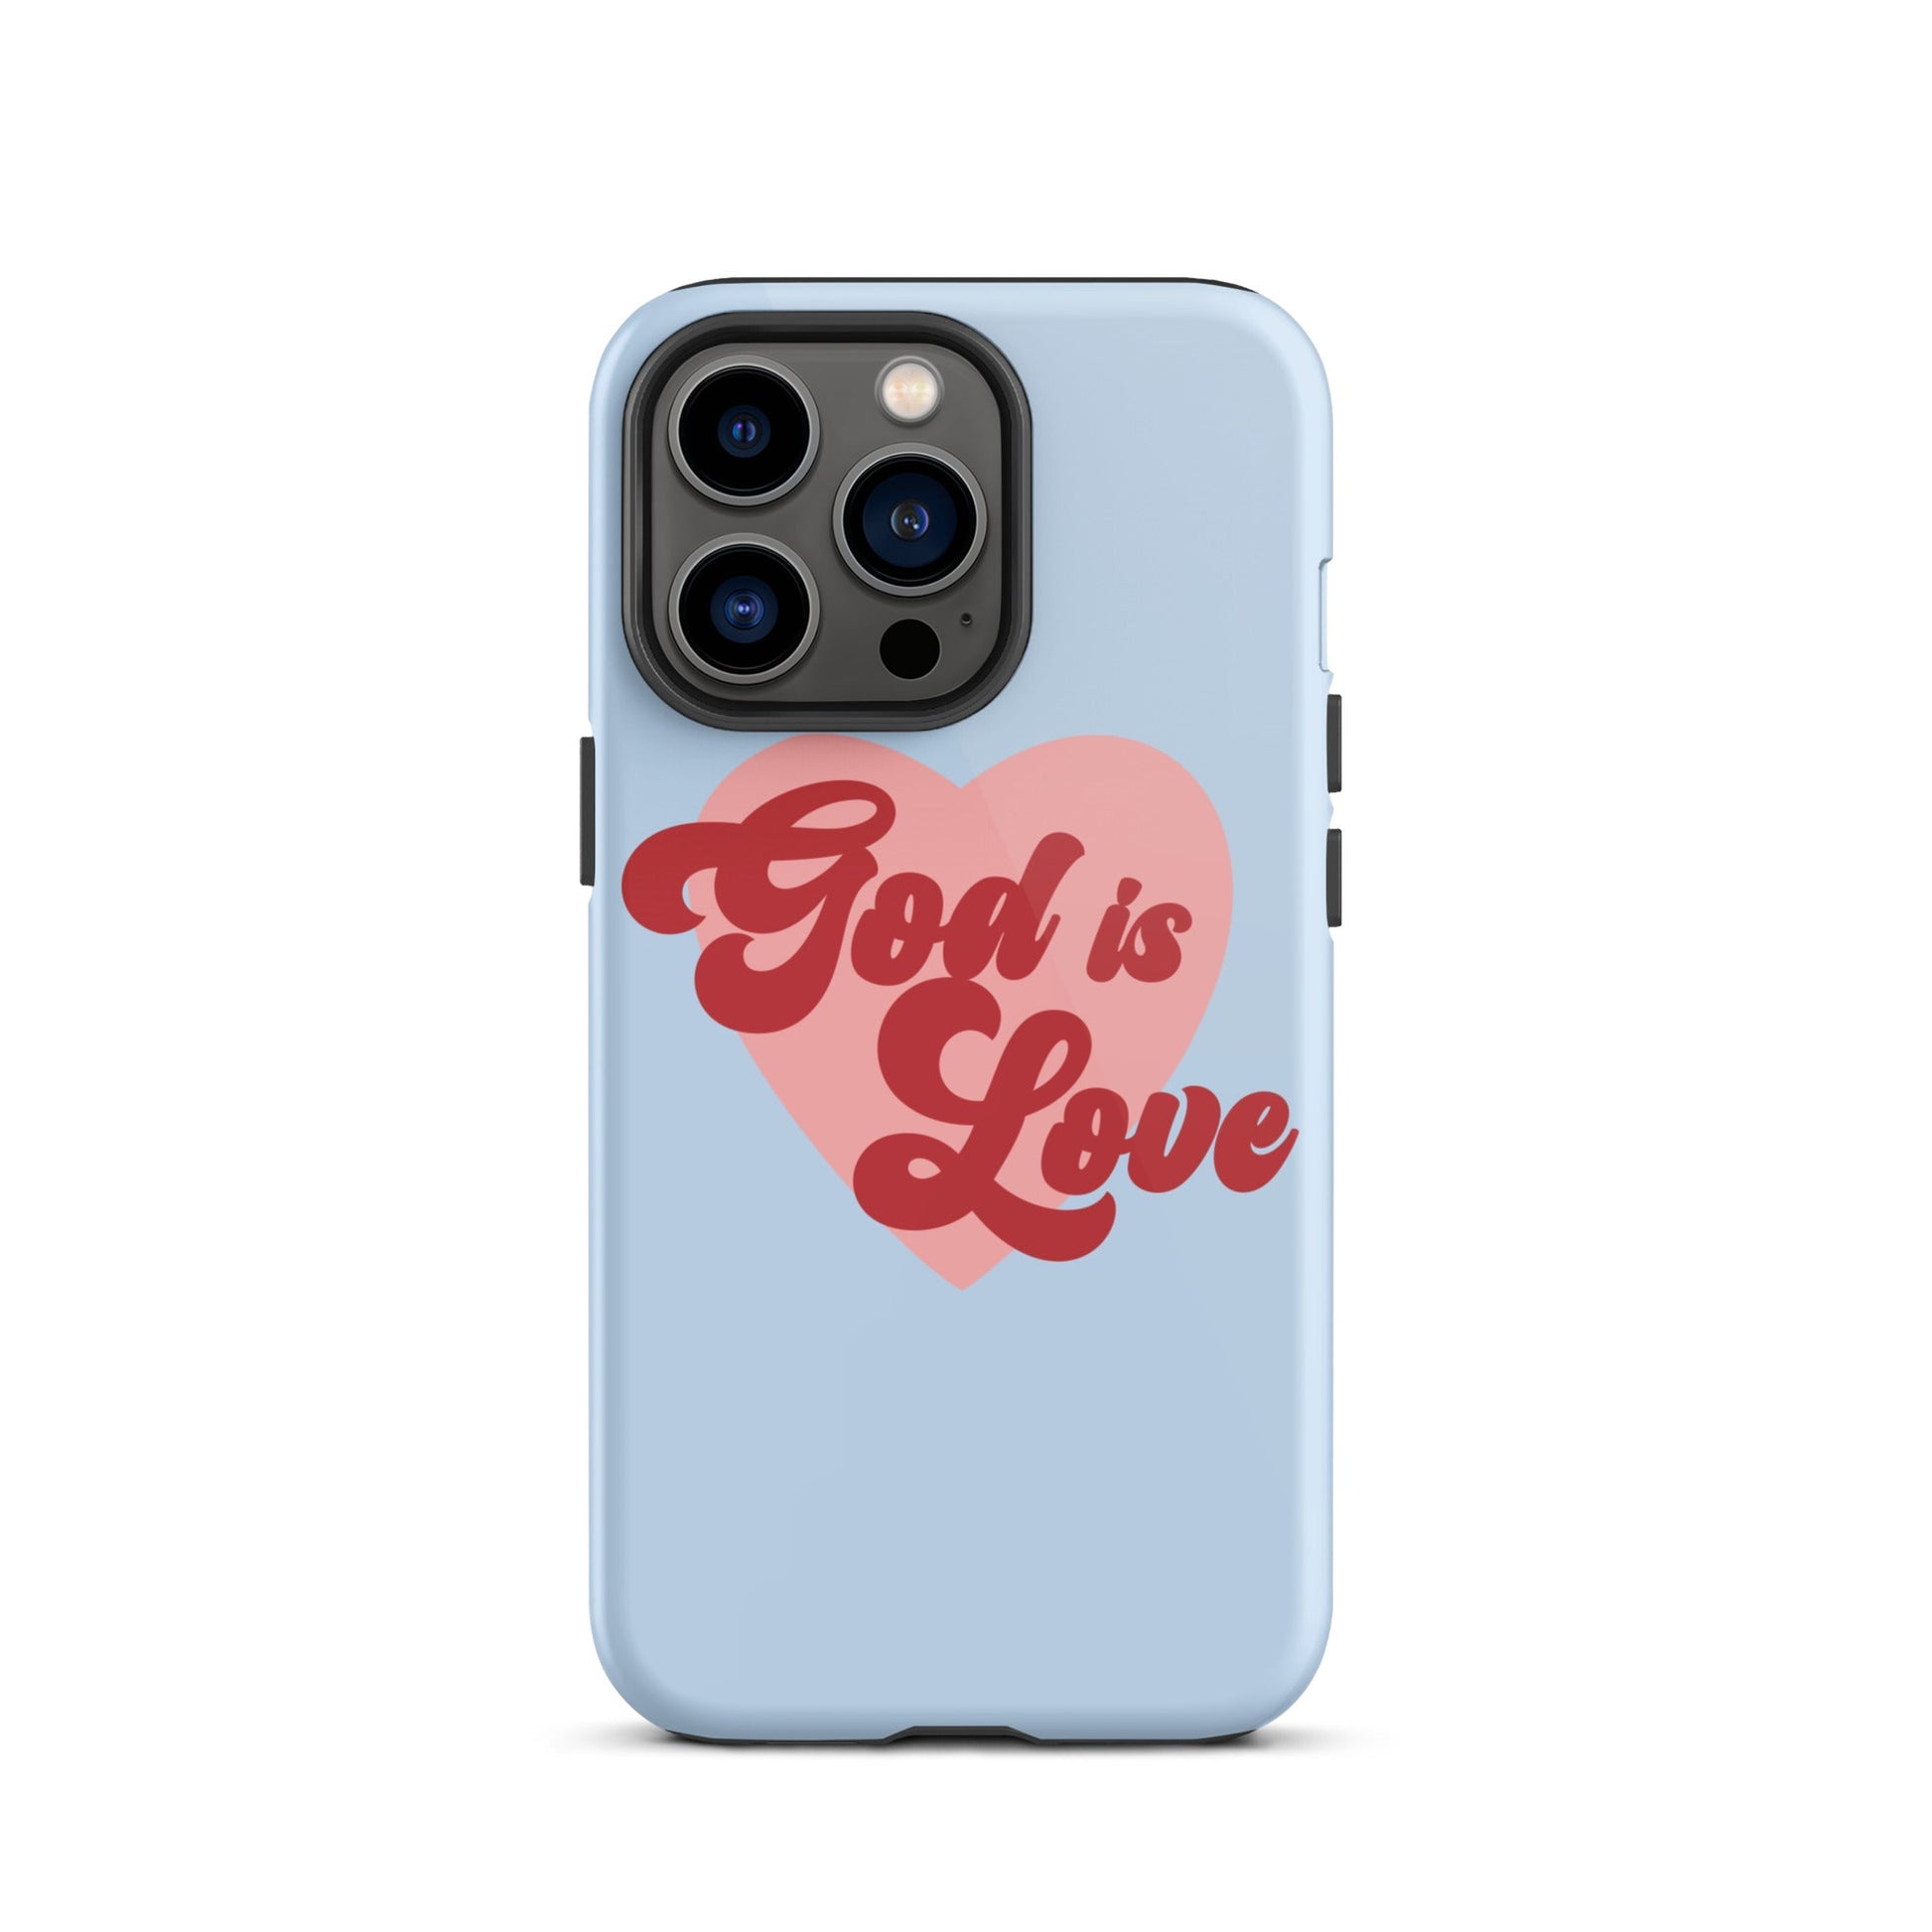 God is Love - Tough iPhone case for iPhone 11 Pro Max & Mini, 12 Pro Max & Mini, 13 Pro Max & Mini, 14 Pro Max & Mini - Creation Awaits